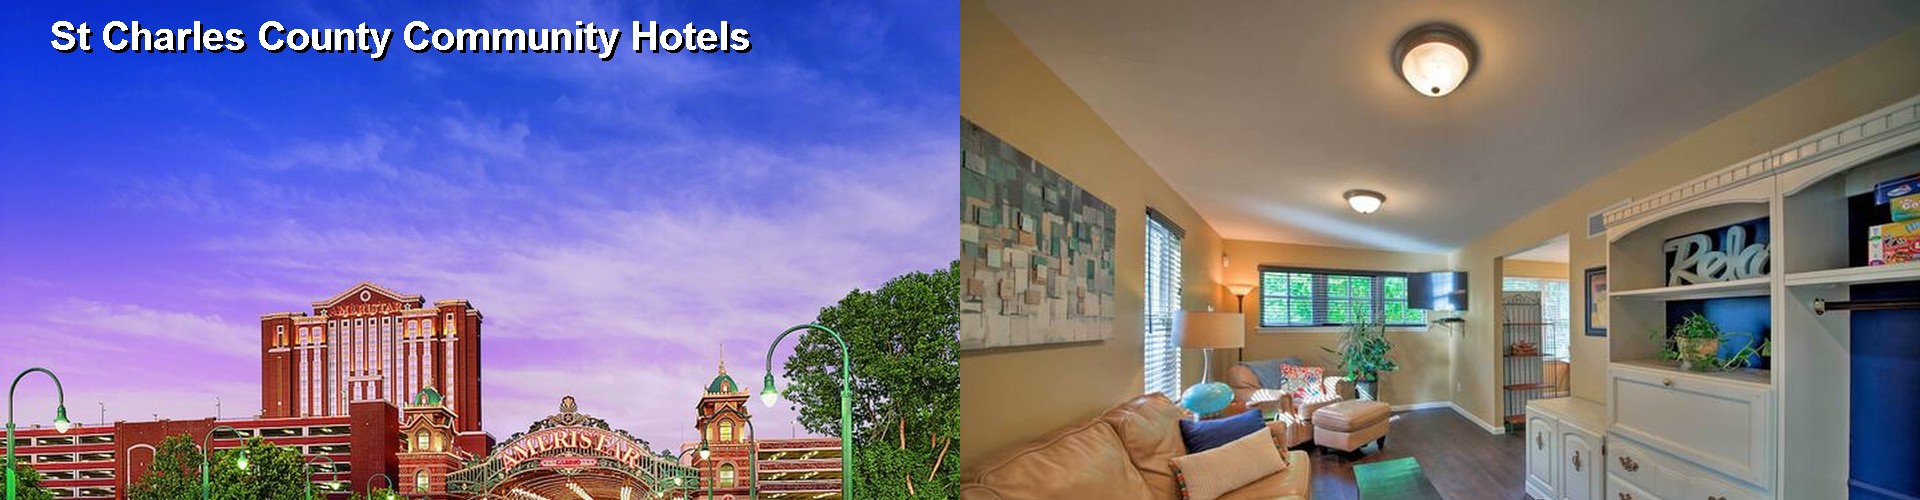 2 Best Hotels near St Charles County Community